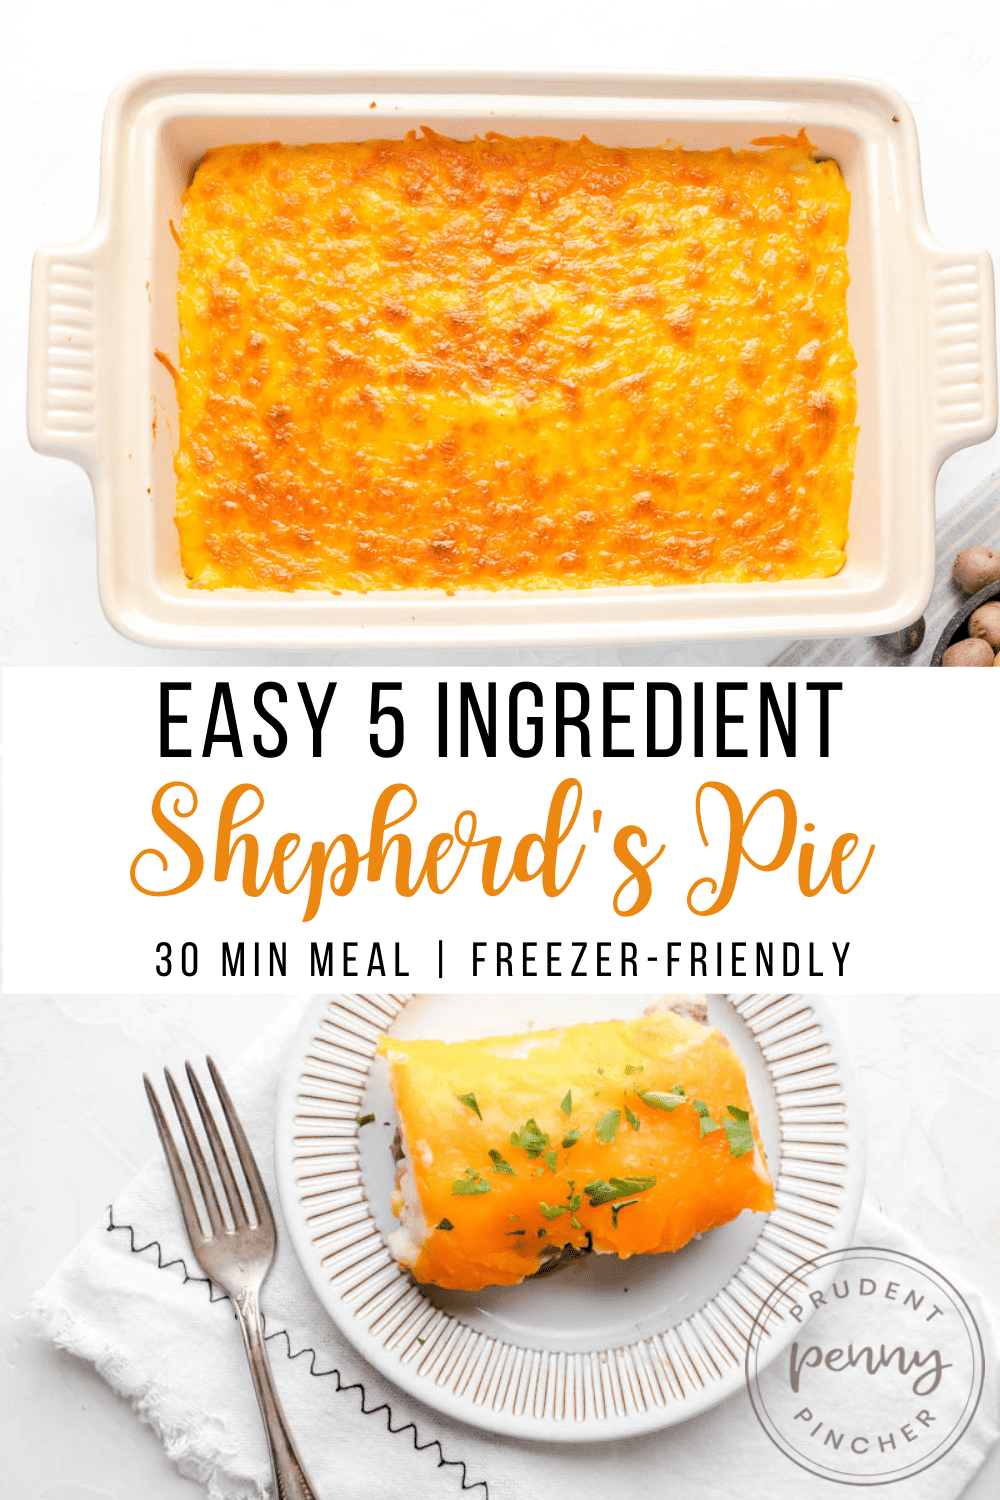  easy shepherd's pie in a casserole dish and served on plate